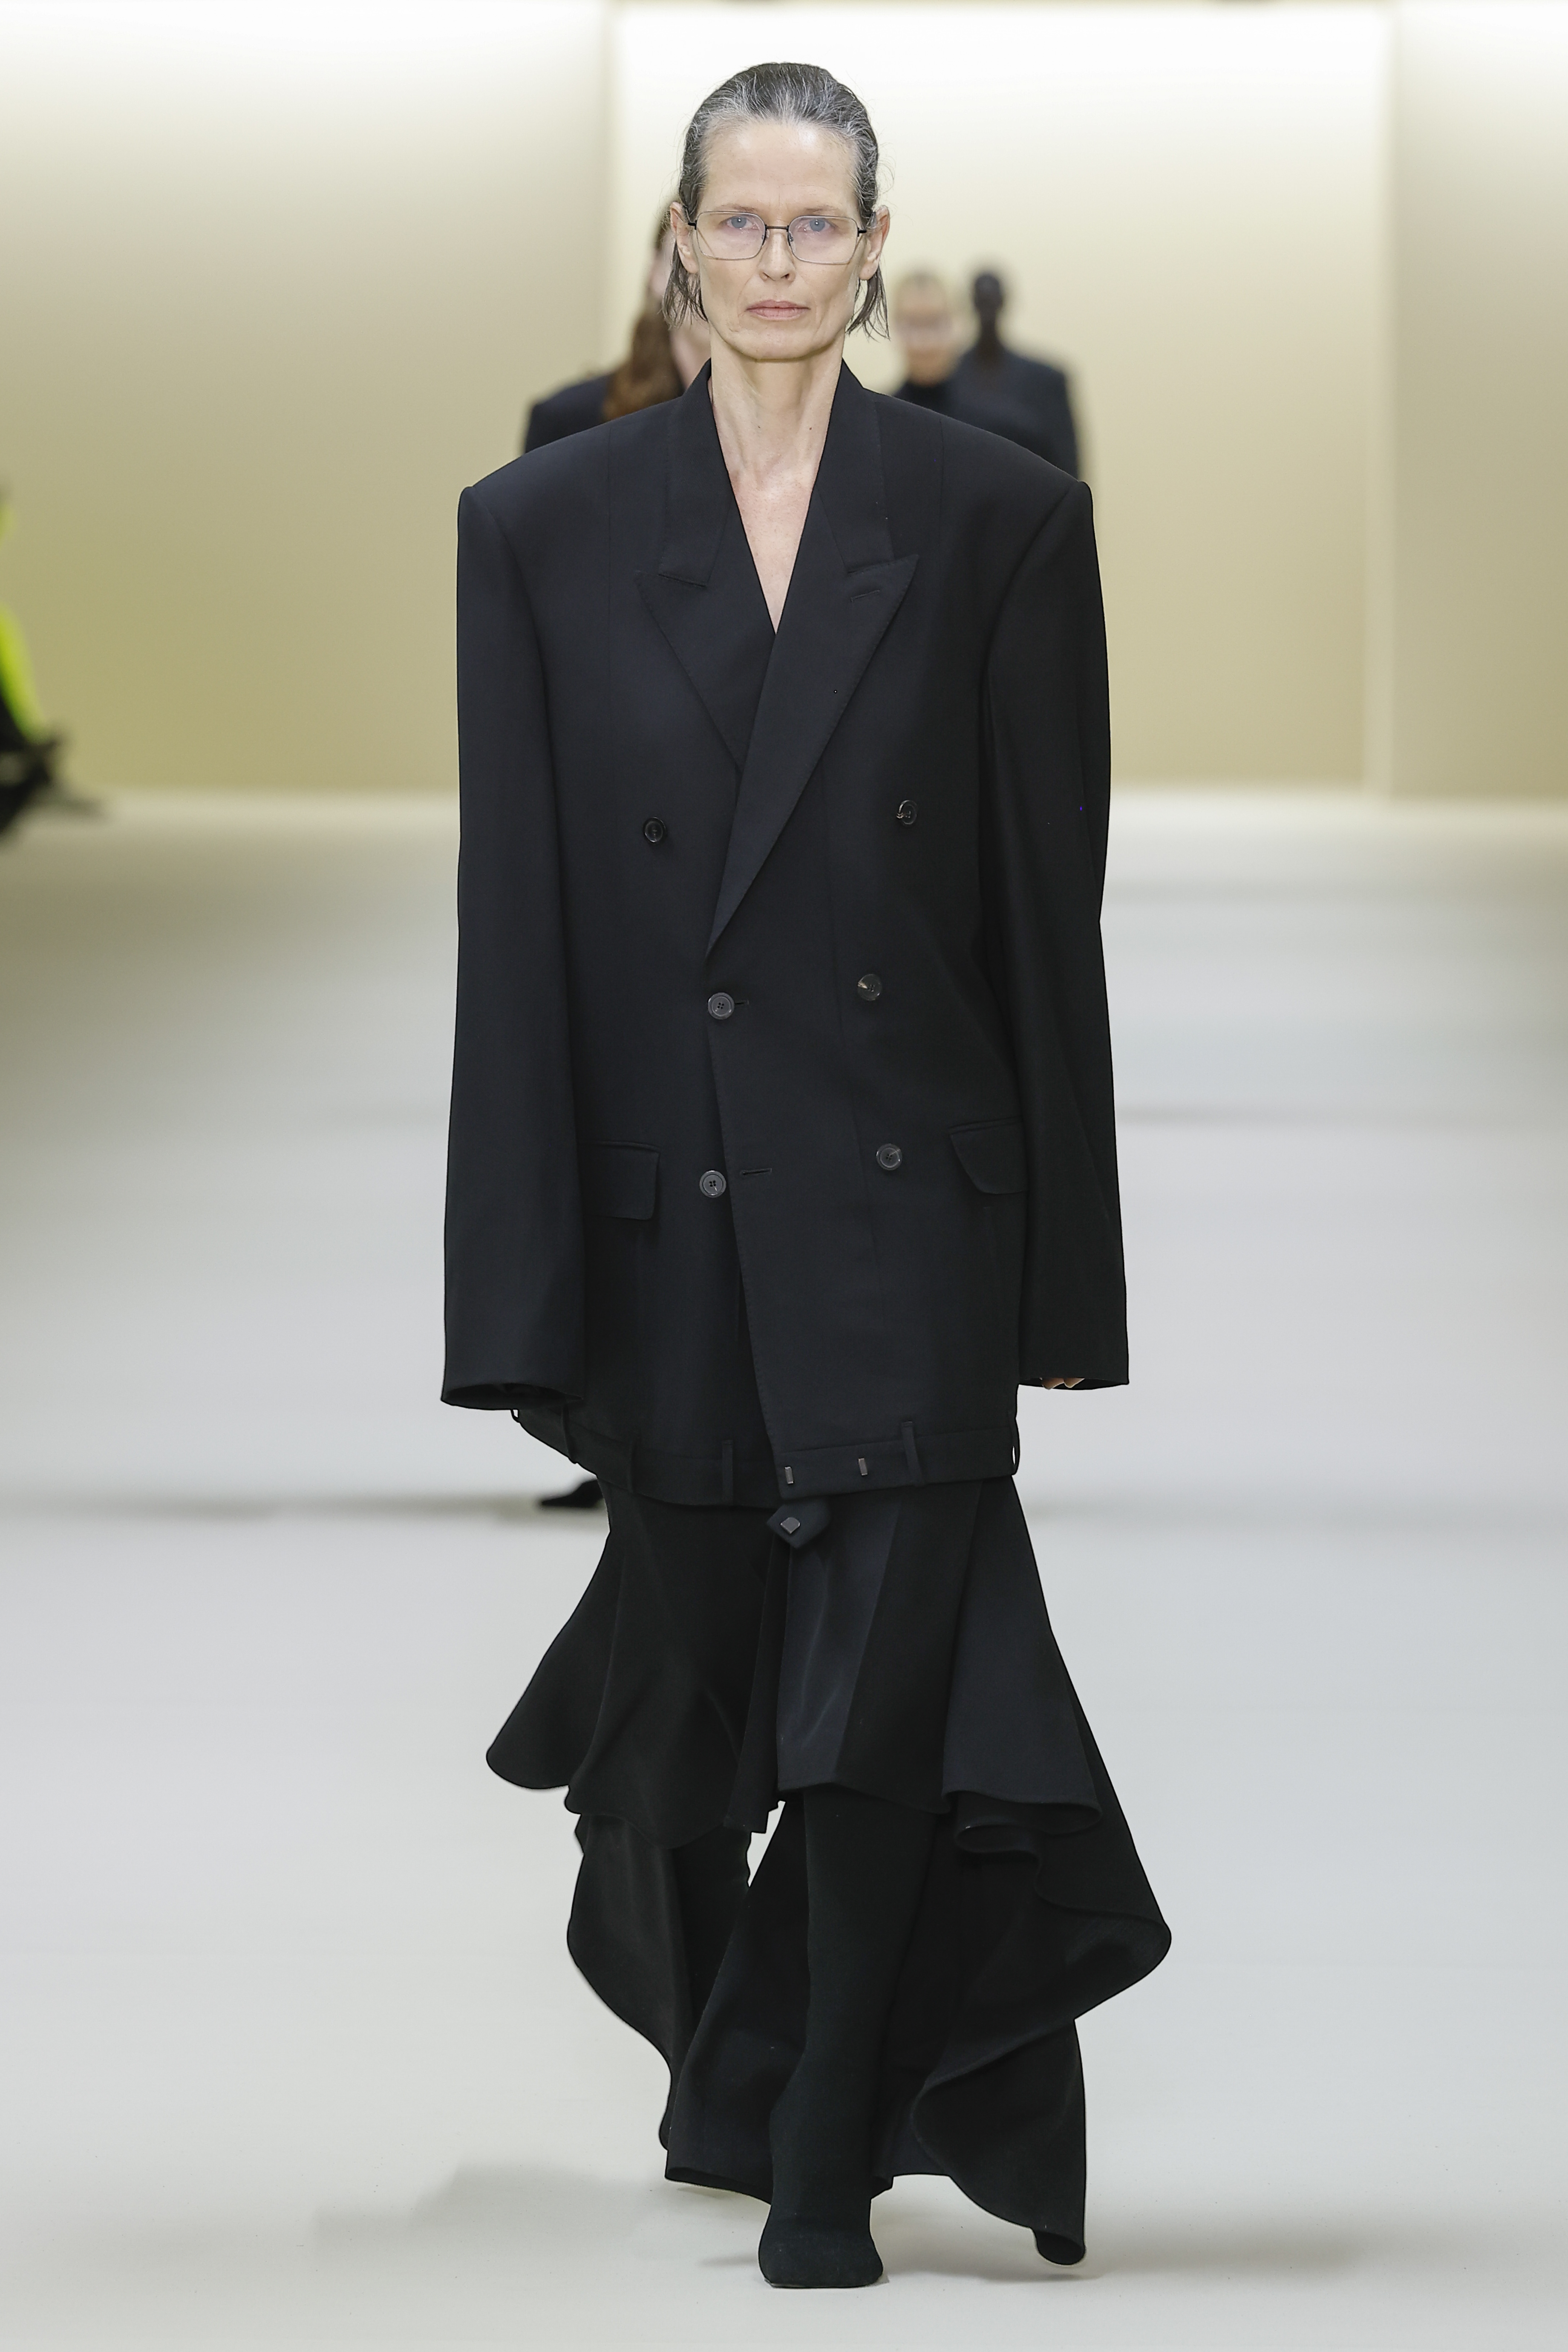 Balenciaga Returns With FW23 Show, For Better or Worse